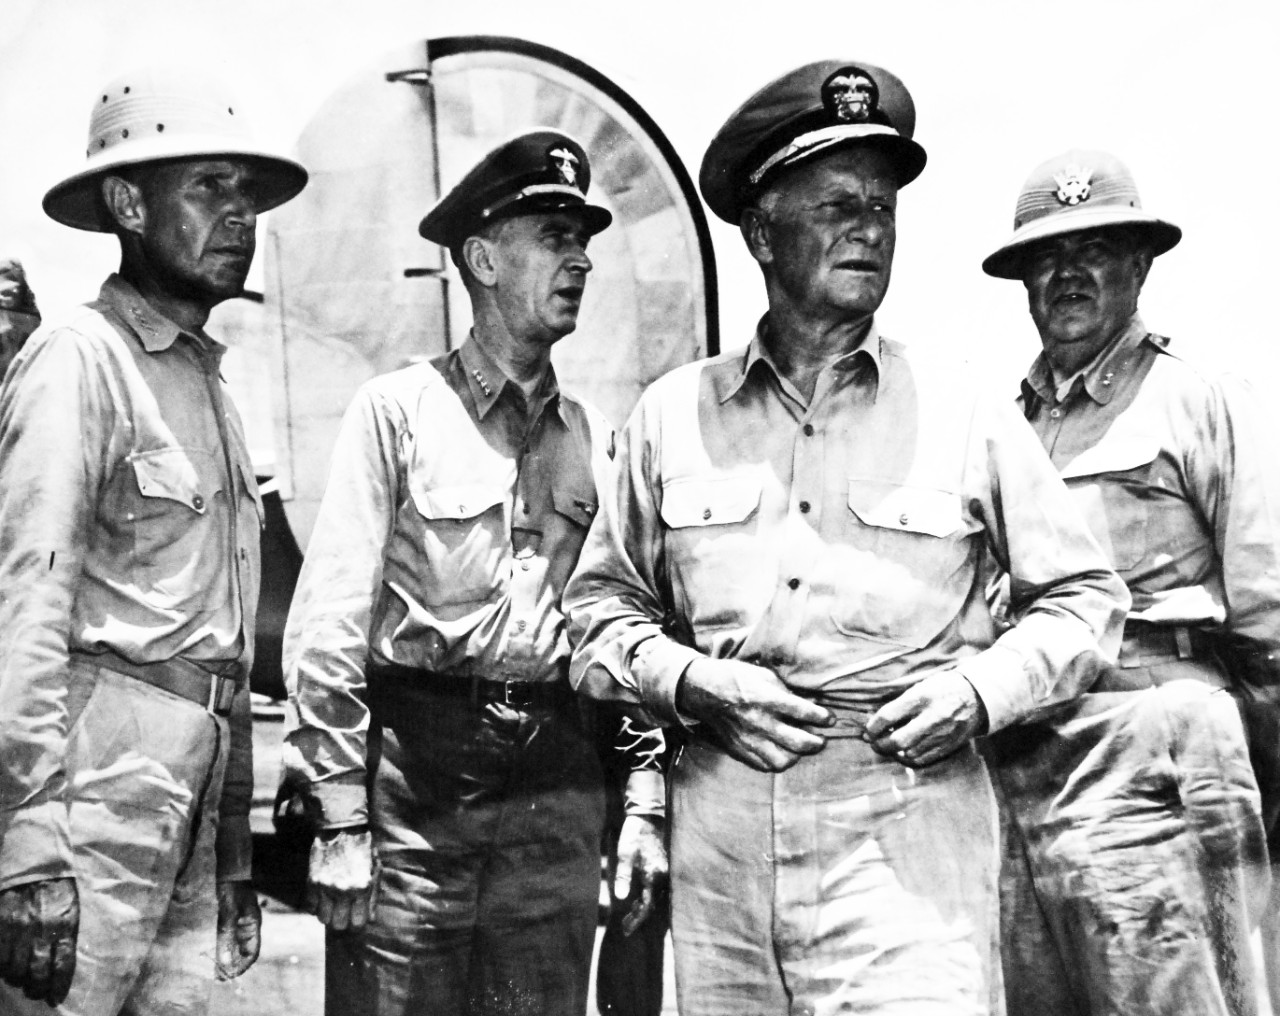 80-G-307861:  Invasion of Saipan, June-July 1944.  Admiral Ernest J. King (second to left) with (left to right): Vice Admiral Raymond A. Spruance, USN; Admiral Chester W. Nimitz, USN; and Brigadier General Sanderford Jarman on a visit. Photograph received March 20, 1945.      Official U.S. Navy Photograph, now in the collections of the U.S. Navy.  (2017/04/11).  